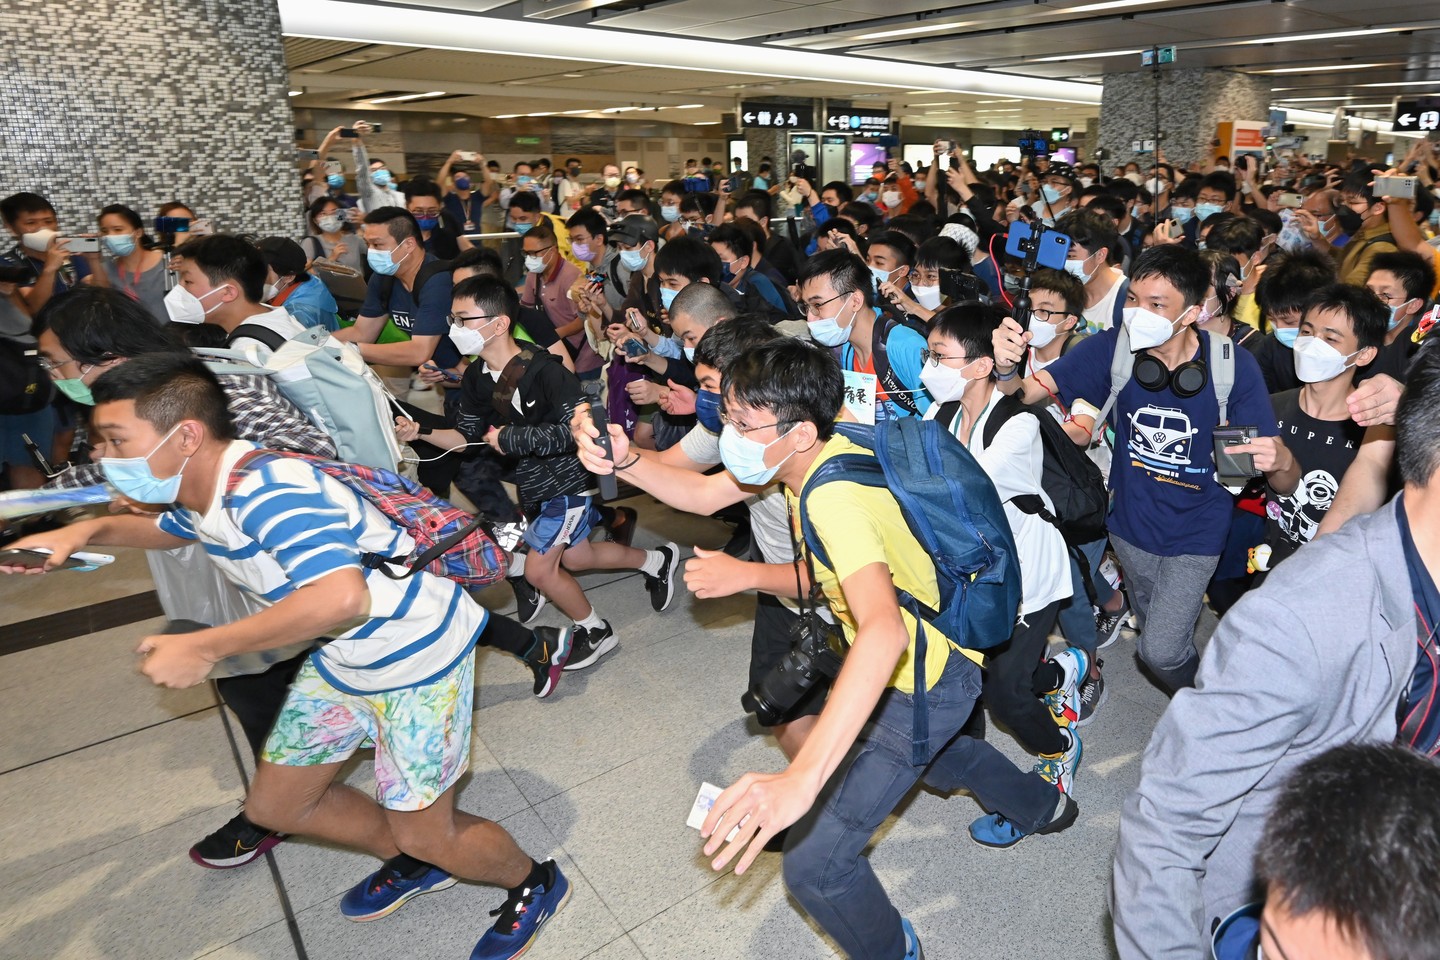 ALL ABOARD! HK'S NEW RAIL LINE OPENS 全城振奮！香港鐵路發展邁向新里程  Railway enthusiasts rushed for the first tickets to ride the new East Rail Line cross-harbour extension on Sunday (May 15). It is the fourth cross-harbour rail line and enables people to travel directly between the Northeast New Territories and the business districts on Hong Kong Island, including the newly opened Convention Centre Station in Wan Chai.   東鐵線過海段於上星期日（5月15日）通車，乘客無須轉線，即可從新界東北及九龍中一程過海，直達會展及金鐘站。逾百年歷史的東鐵線跨越維港，為香港第四條過海鐵路。  #hongkong #brandhongkong #asiasworldcity #EastRailLineCrossHarbourExtension #GoSmartGoBeyond #ServiceCommencement #香港 #香港品牌 #亞洲國際都會 #東鐵線過海段 #一程過海 #連接港九新界